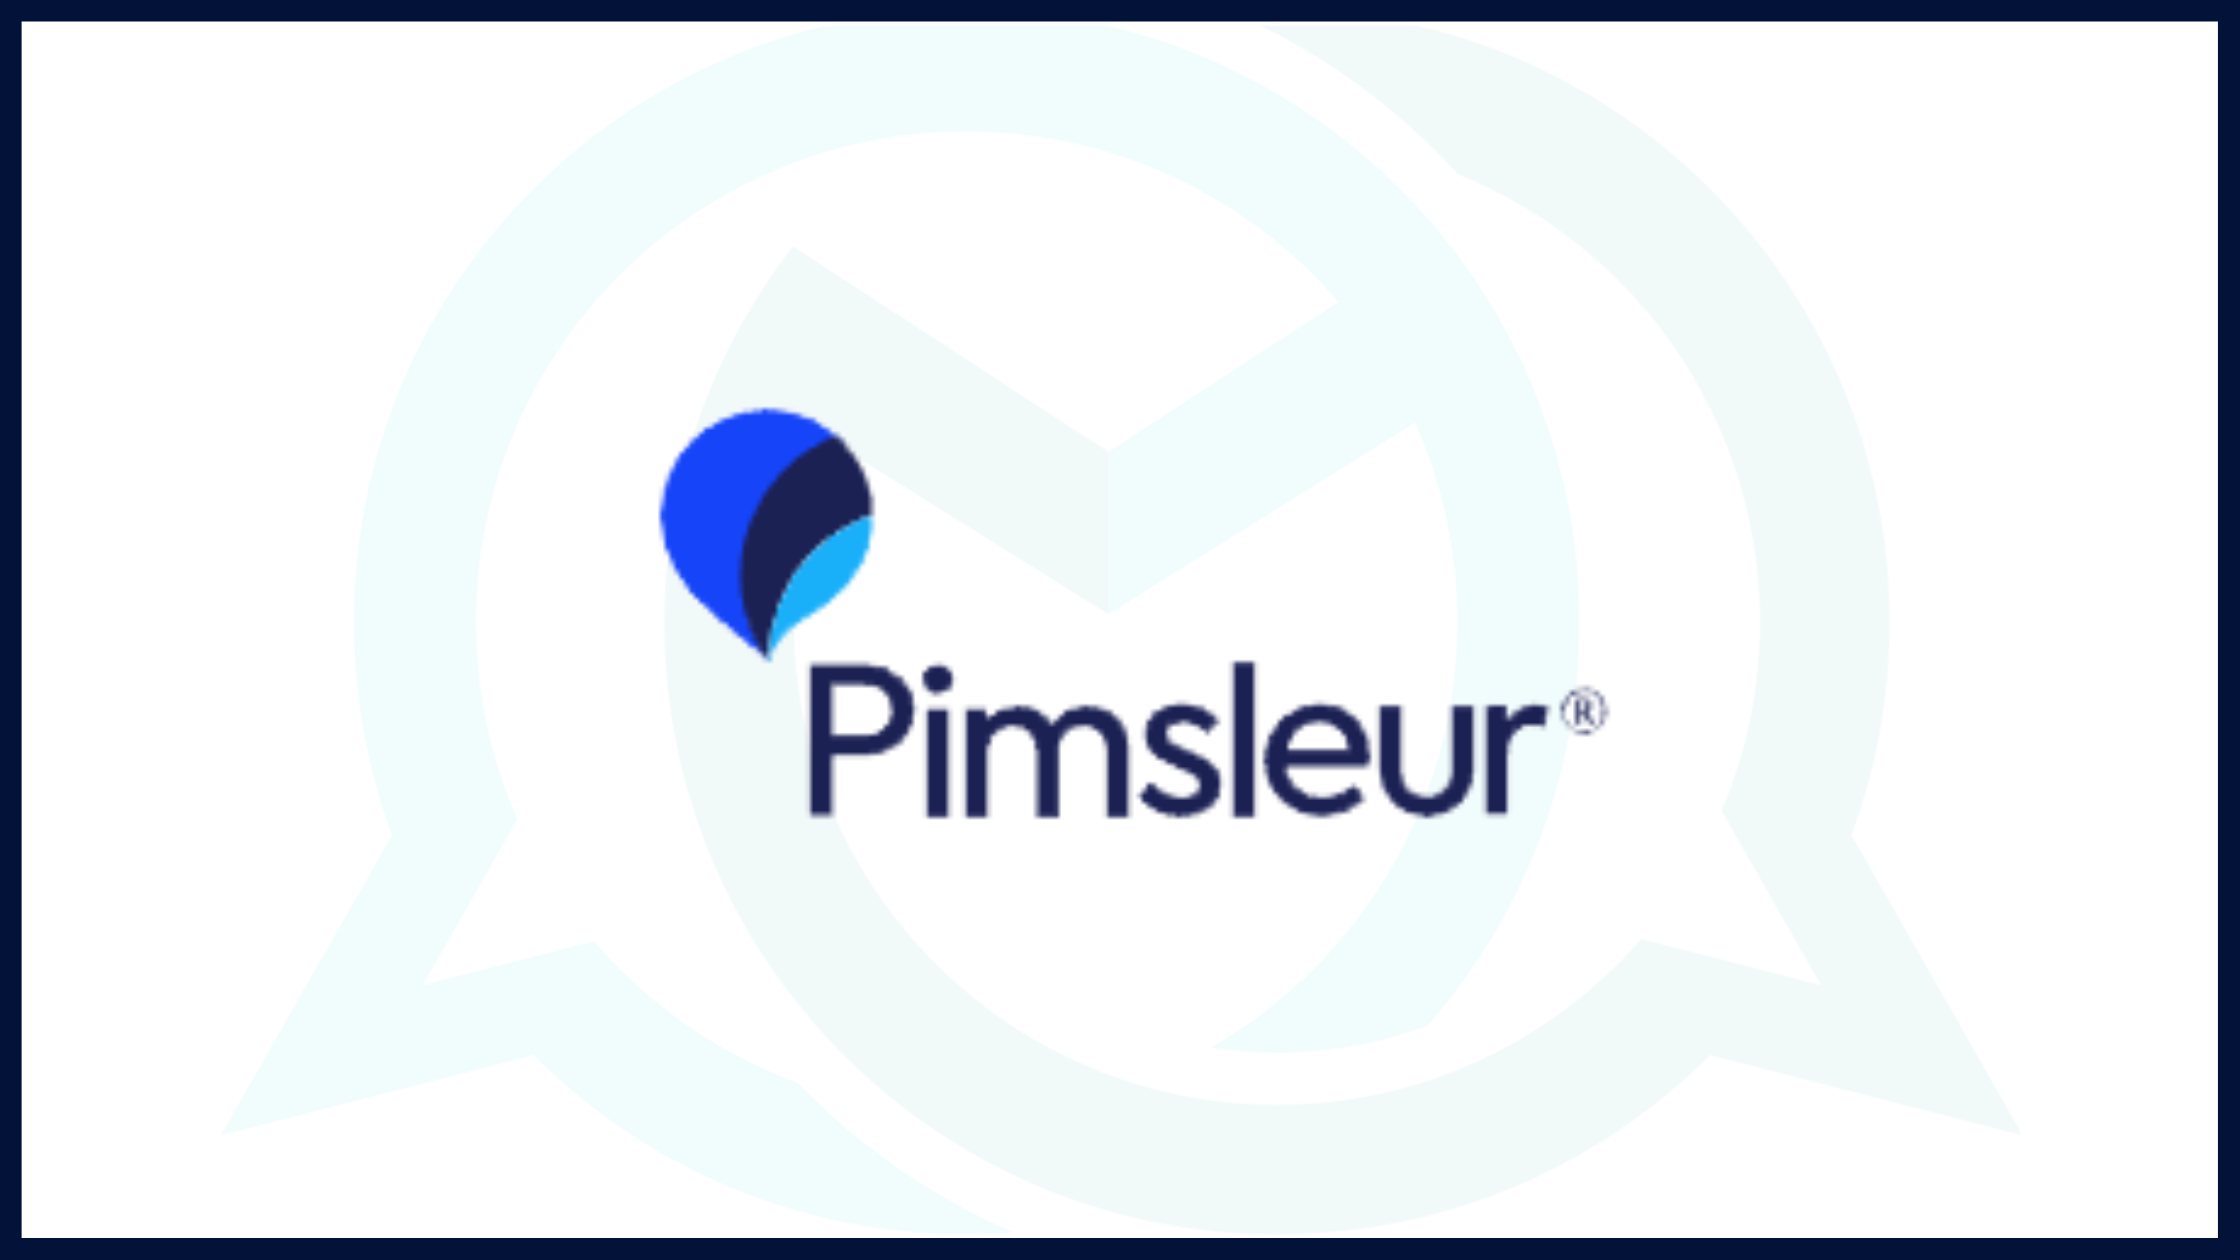 pimsleur review